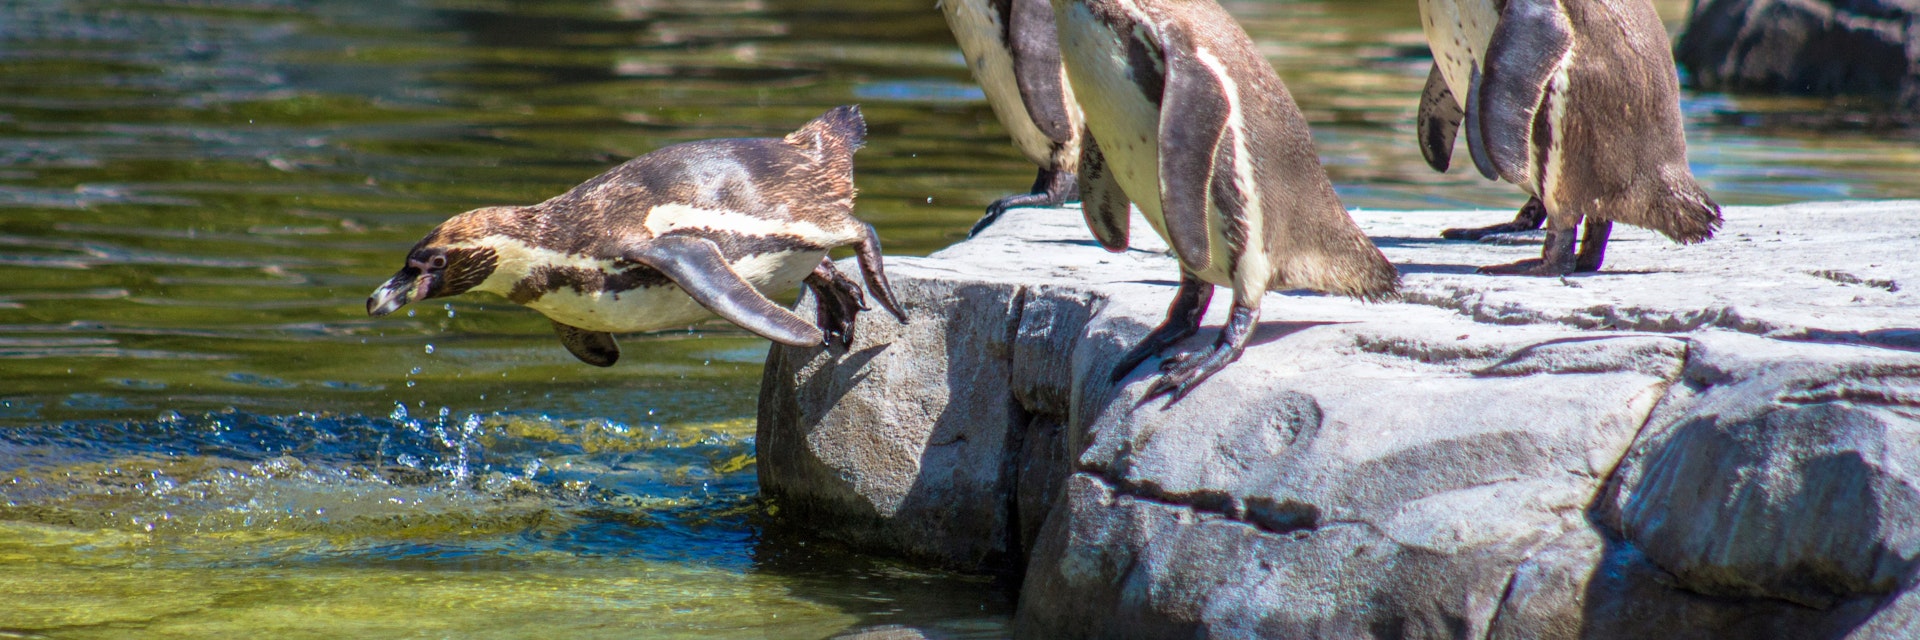 Humboldt Penguins about to take a dip at Chester Zoo